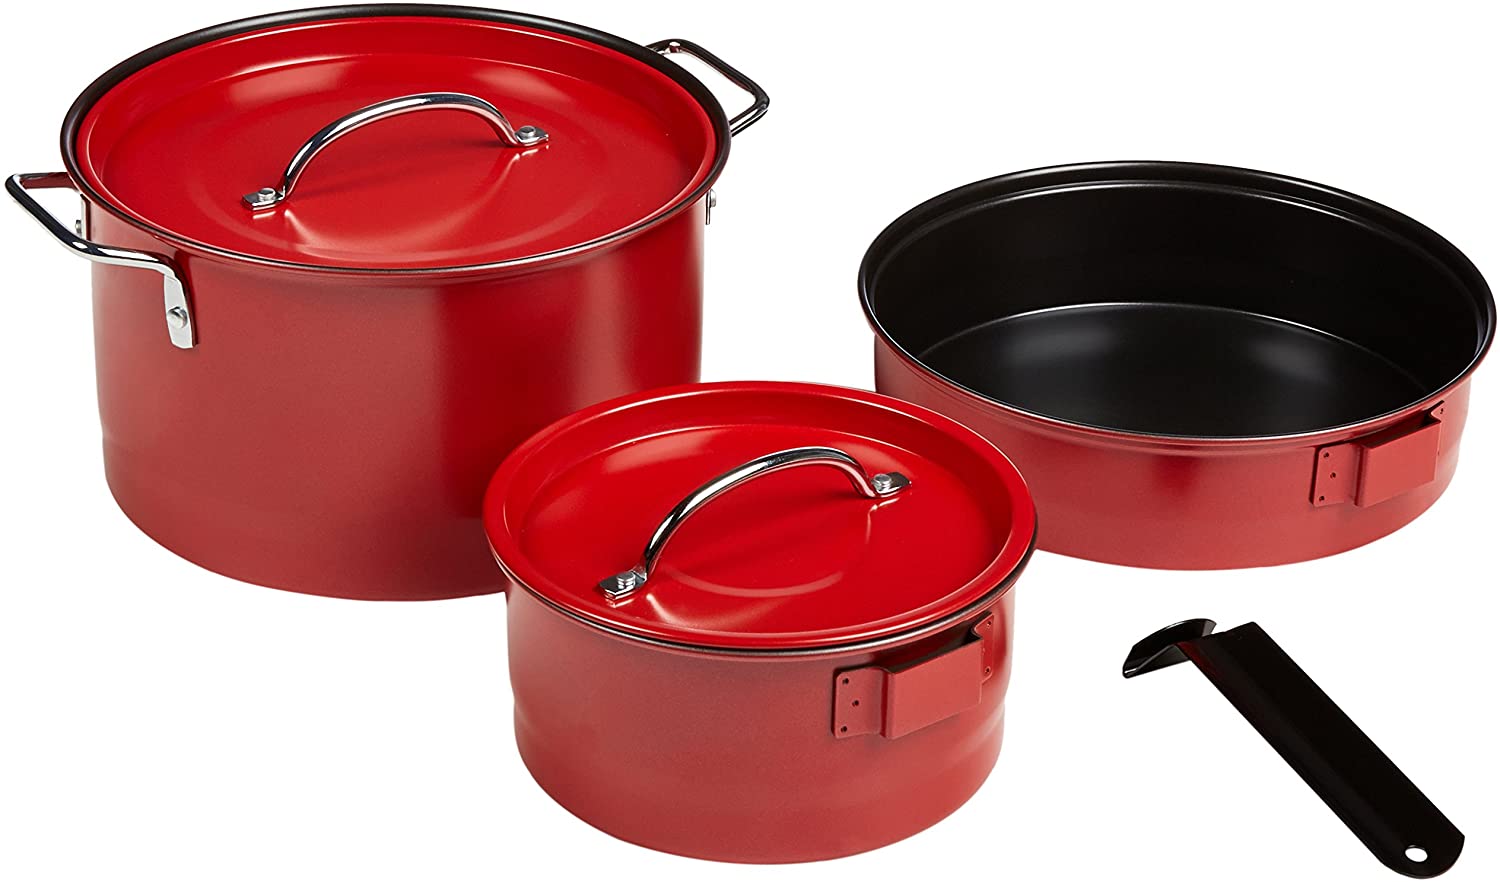 Coleman 5 Piece Family Cook Set - image 4 of 4